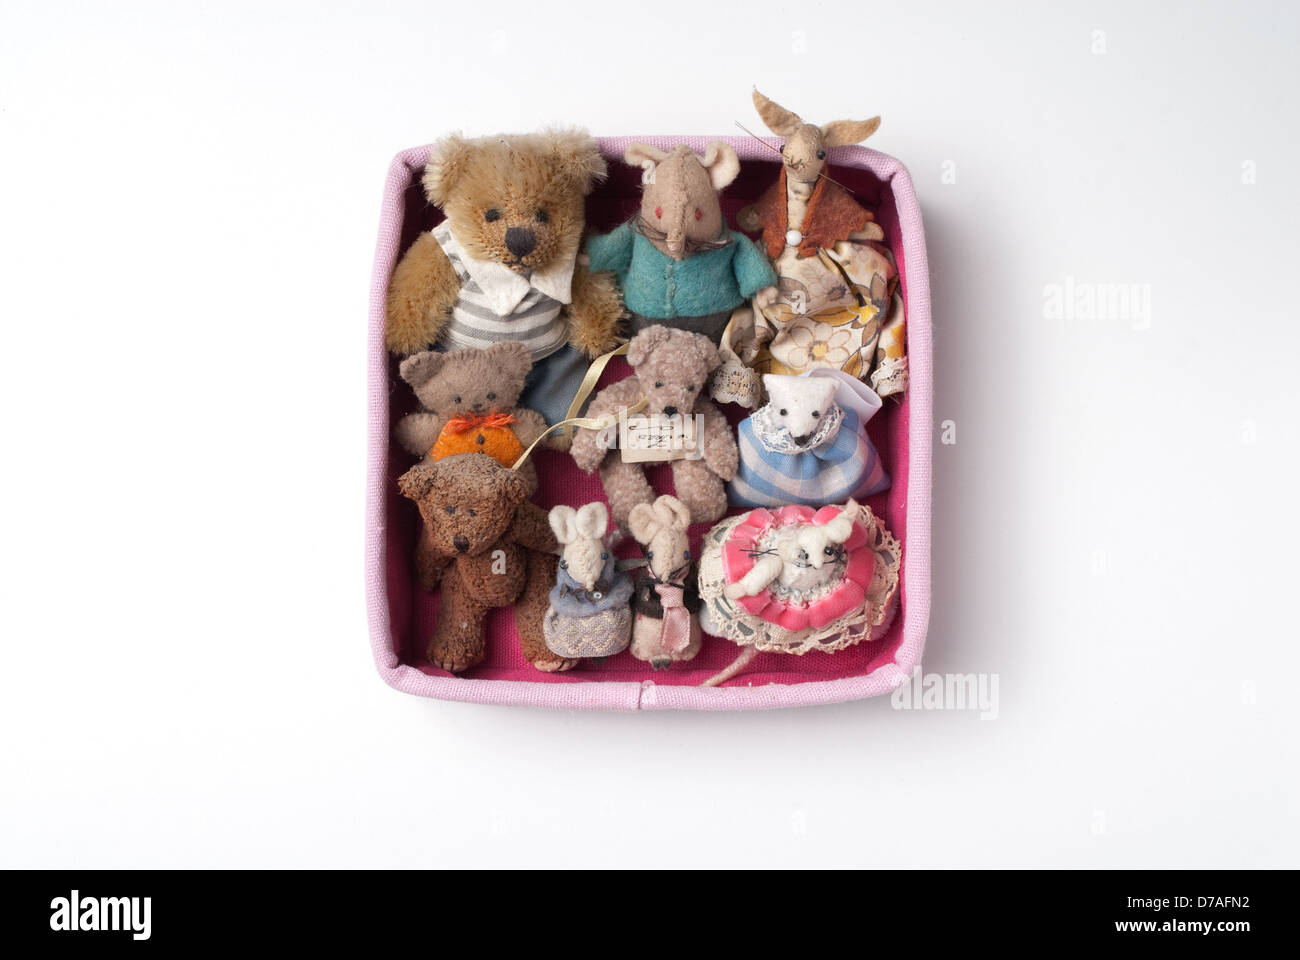 From a series called 'The Pink Box Project'. A collection of miniature teddy bears and mice framed in a pink box. Stock Photo